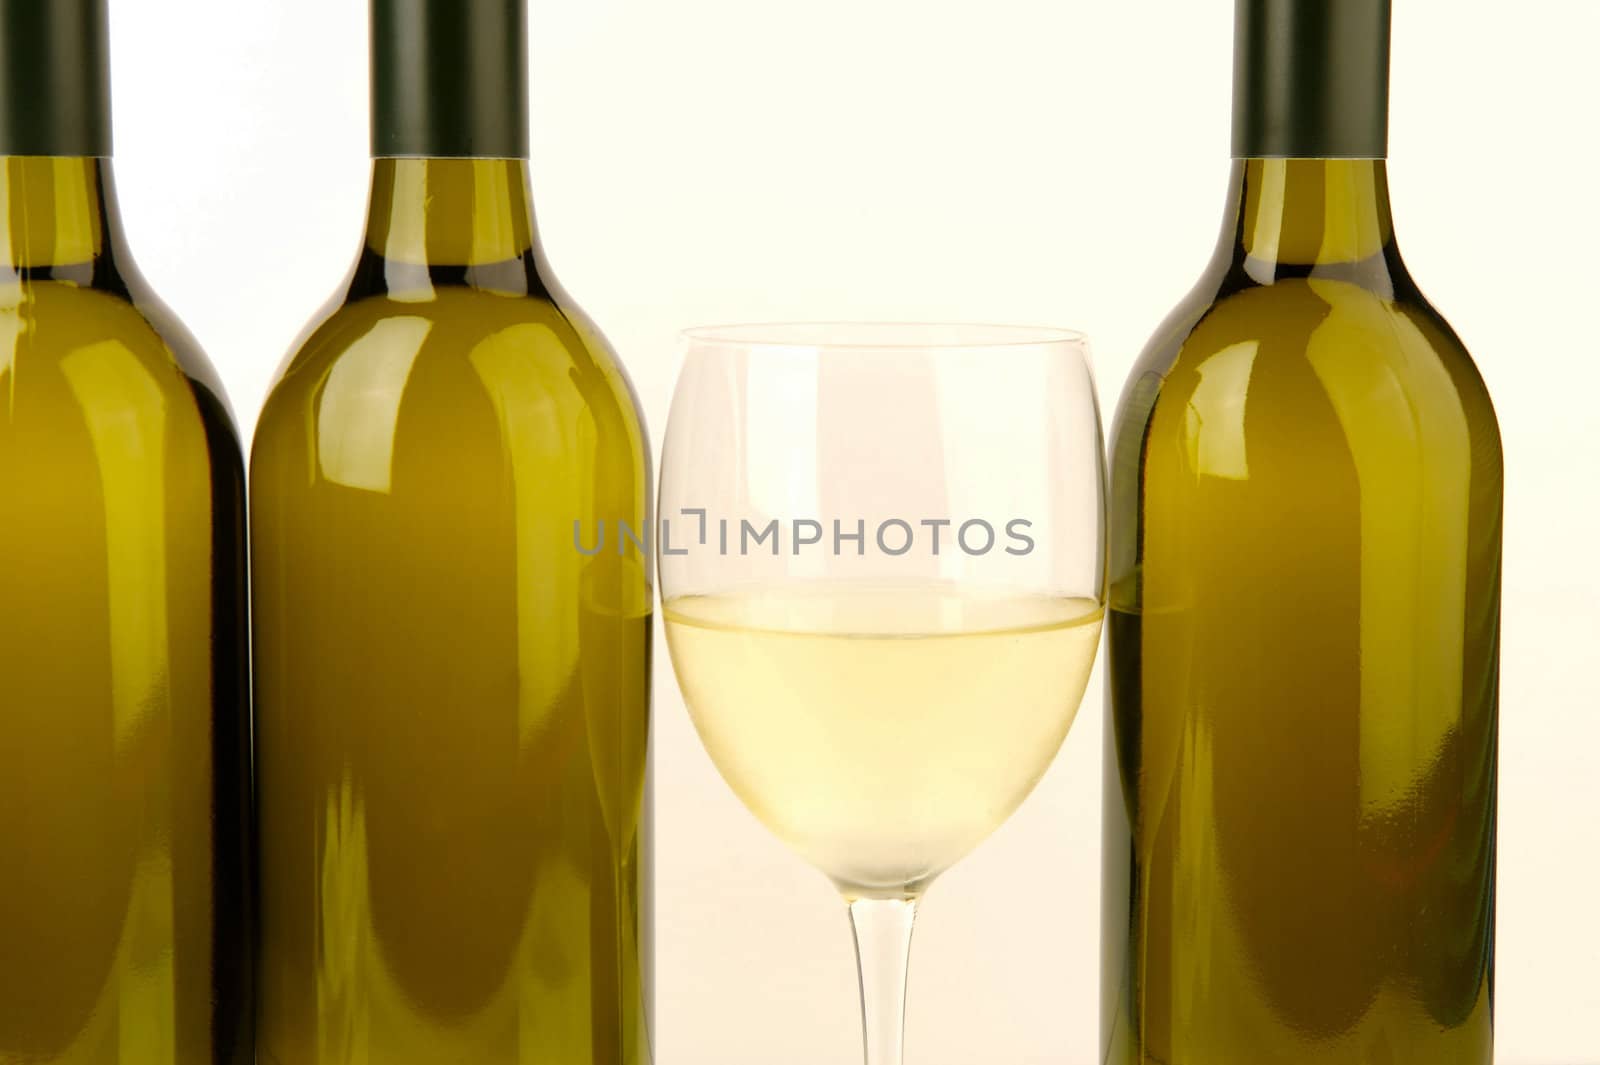 White wine bottles isolated against a white background